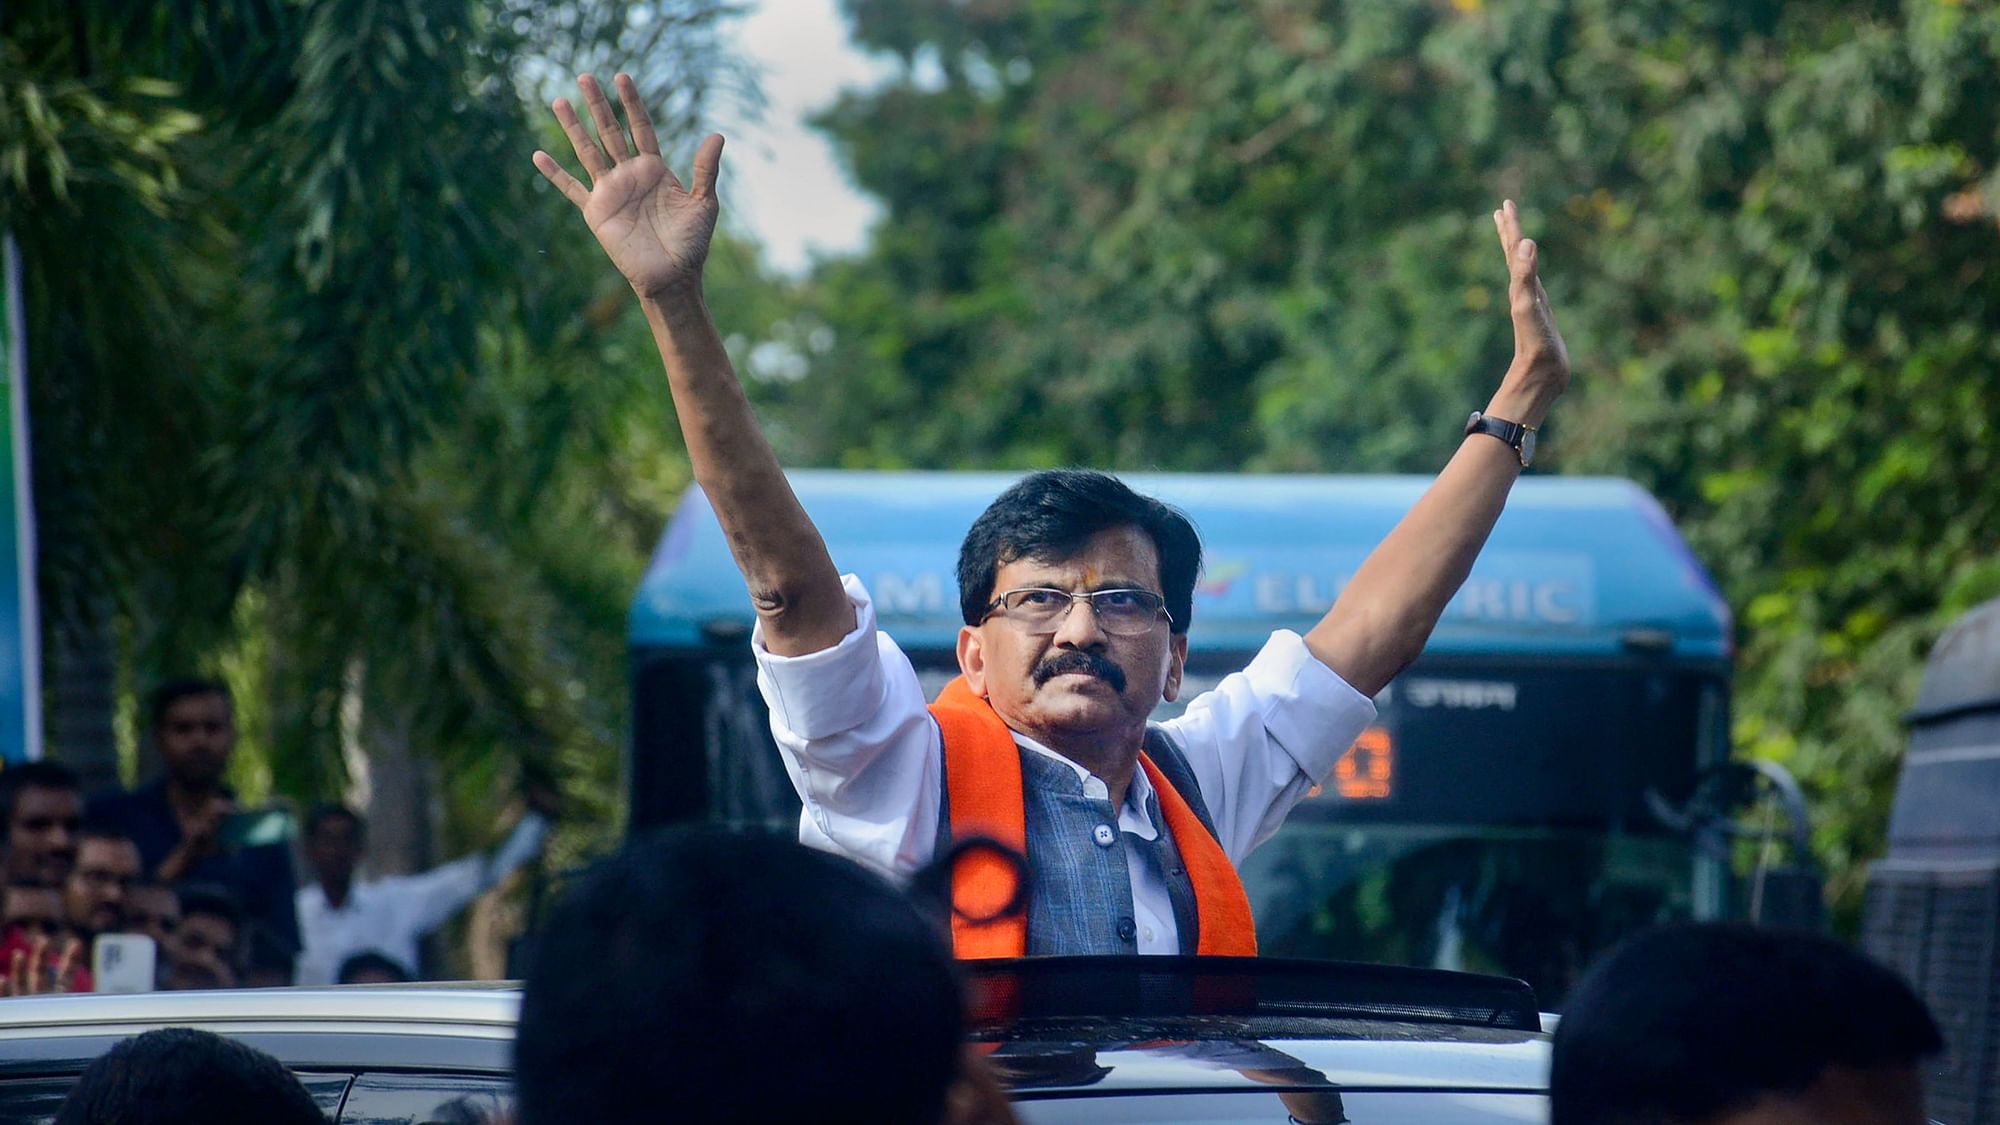 <div class="paragraphs"><p>The <a href="https://www.thequint.com/topic/enforcement-directorate">Enforcement Directorate</a> (ED) was granted custody of the Shiv Sena MP Sanjay Raut till 4 August in the <a href="https://www.thequint.com/news/politics/sanjay-raut-enforcement-directorate-office-appearance-summons#read-more">Patra Chawl land scam case</a> on Monday, 1 August.</p><p><br></p></div>